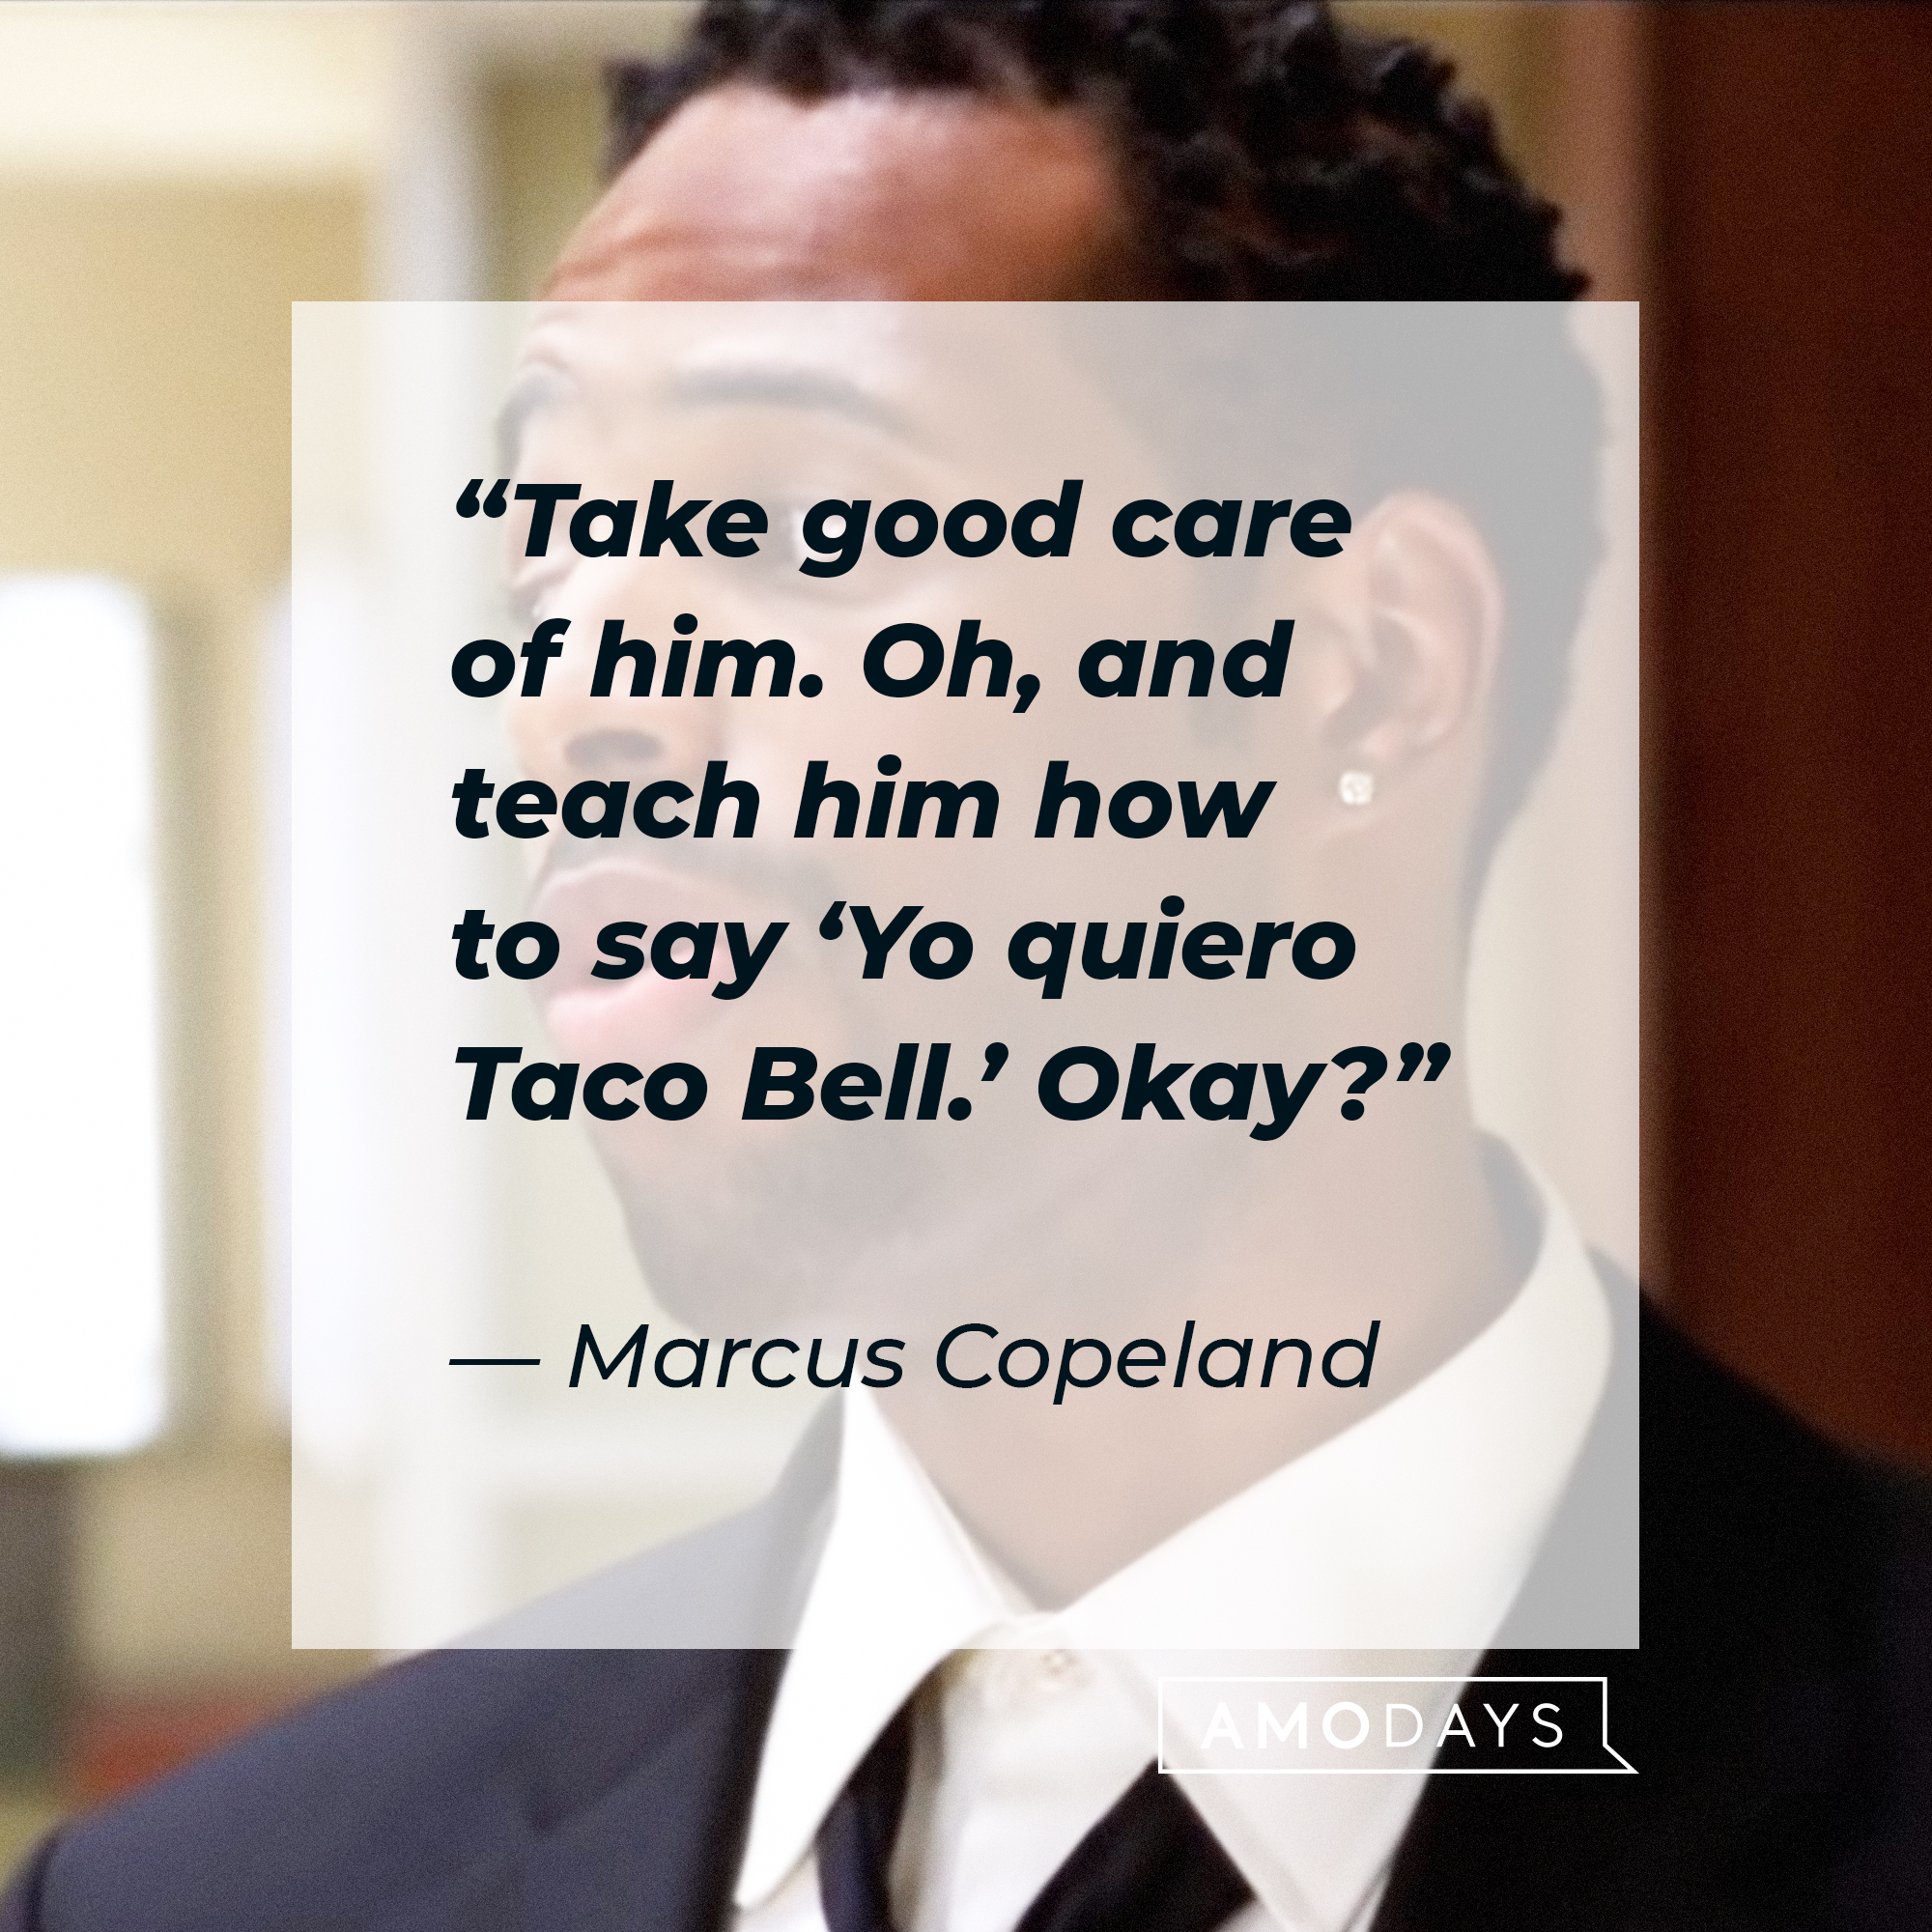 Marcus Copeland with his quote: “Take good care of him, oh, and teach him how to say ‘Yo quiero Taco Bell.’ Okay?” | Source: Sony Pictures Entertainment